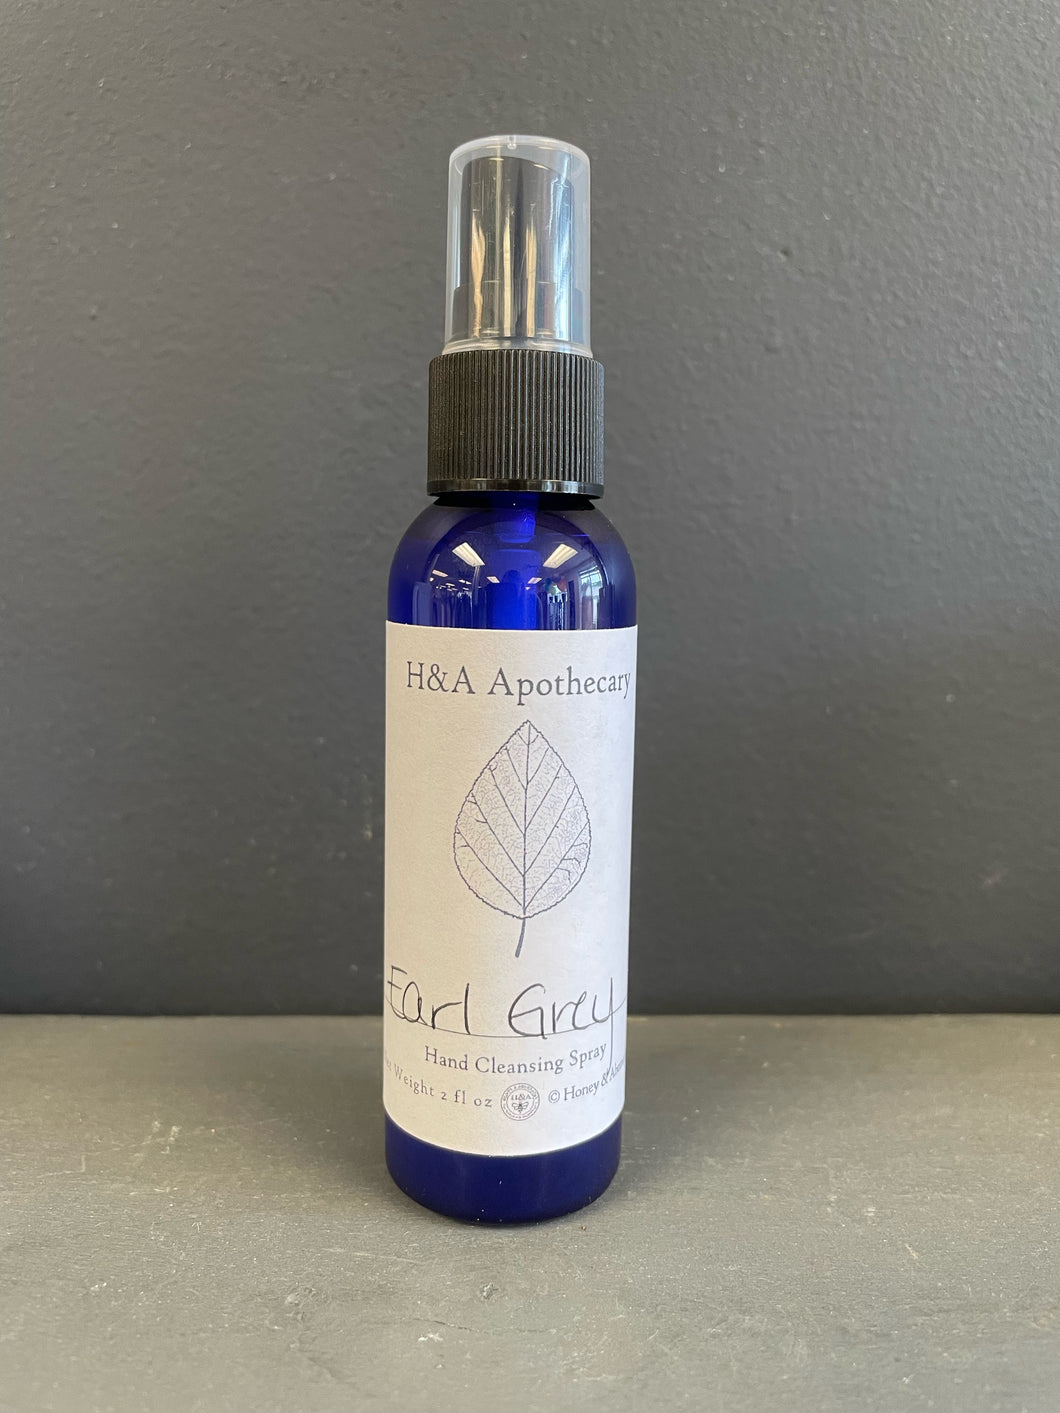 H&A Apothecary Earl Grey Hand Cleansing Spray